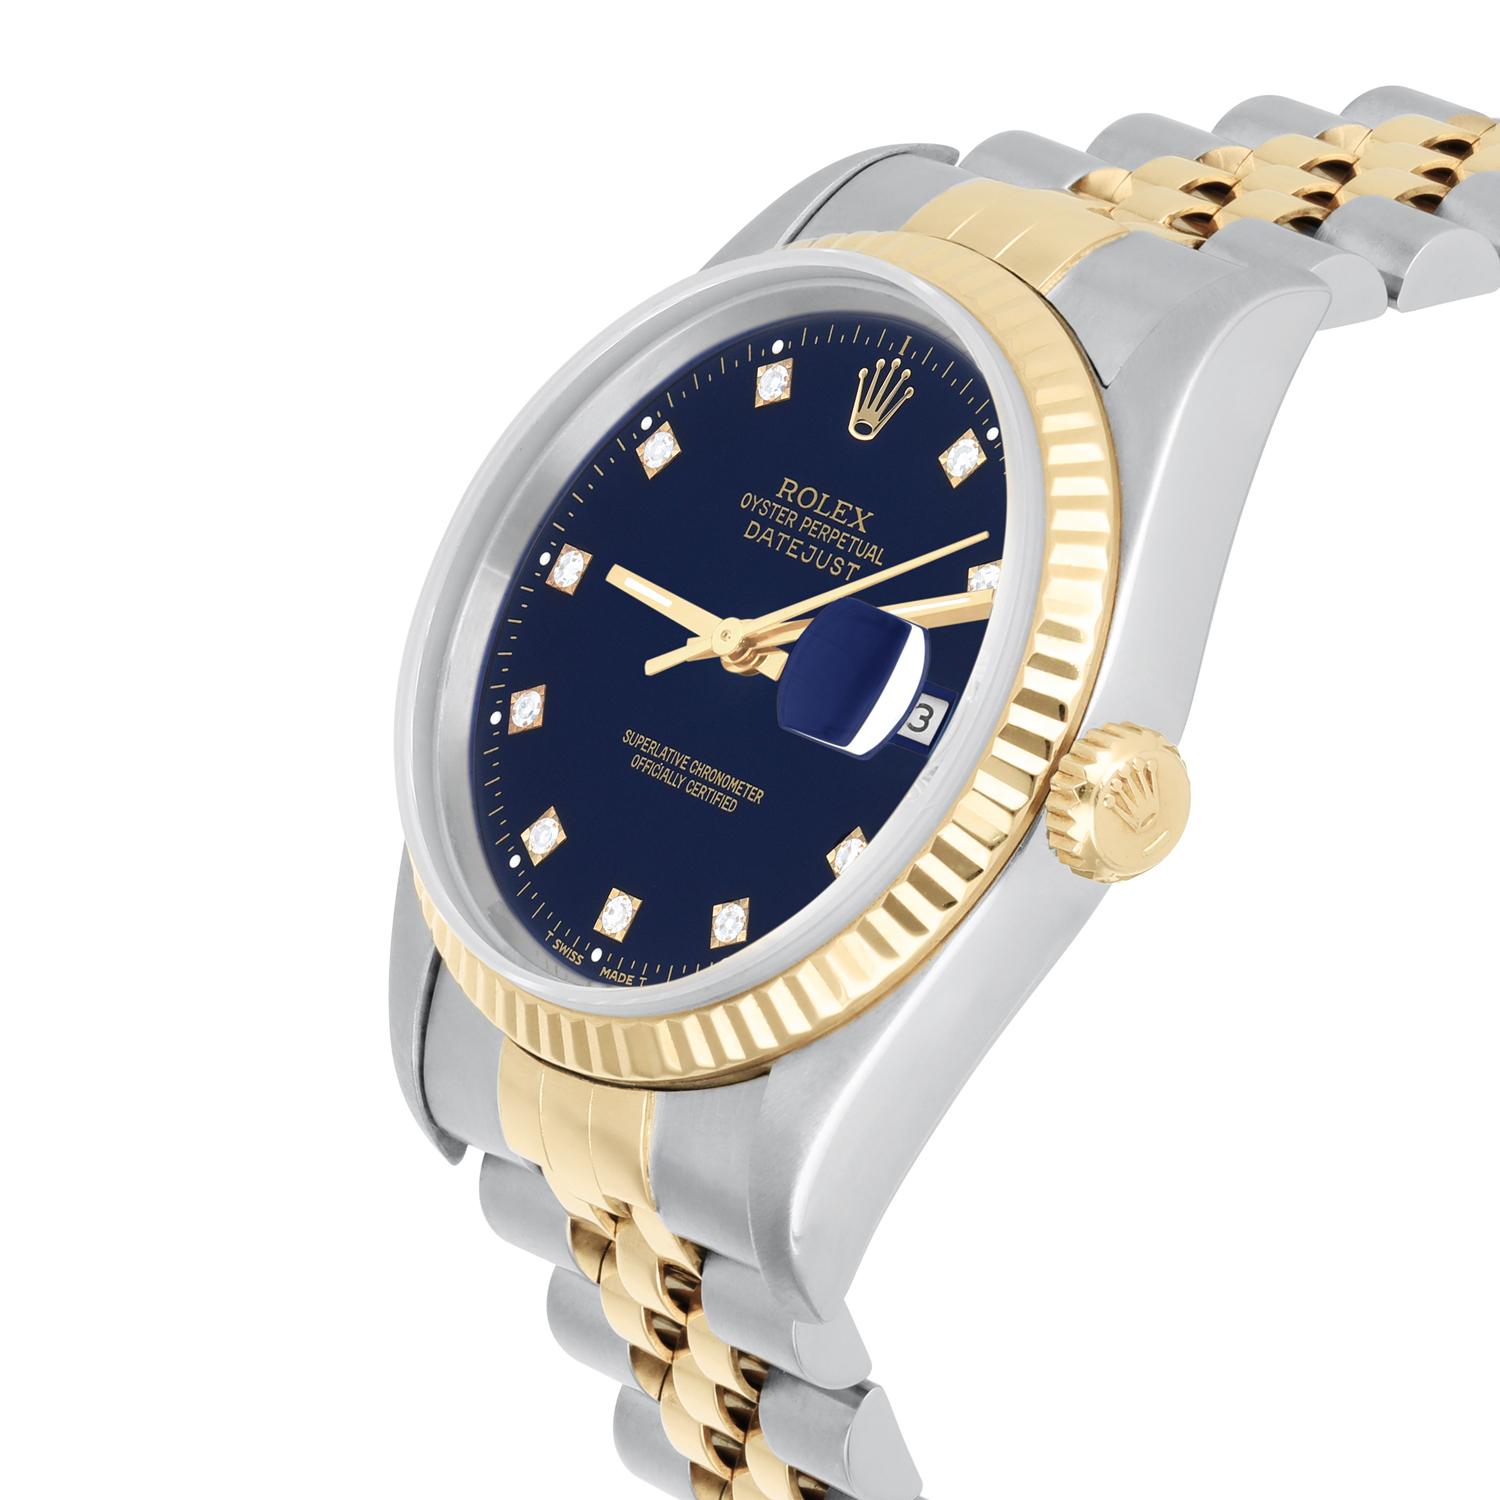 Rolex Datejust 36mm Two Tone Dark Blue Diamond Dial Jubilee 16233 Circa 1993 In Excellent Condition For Sale In New York, NY